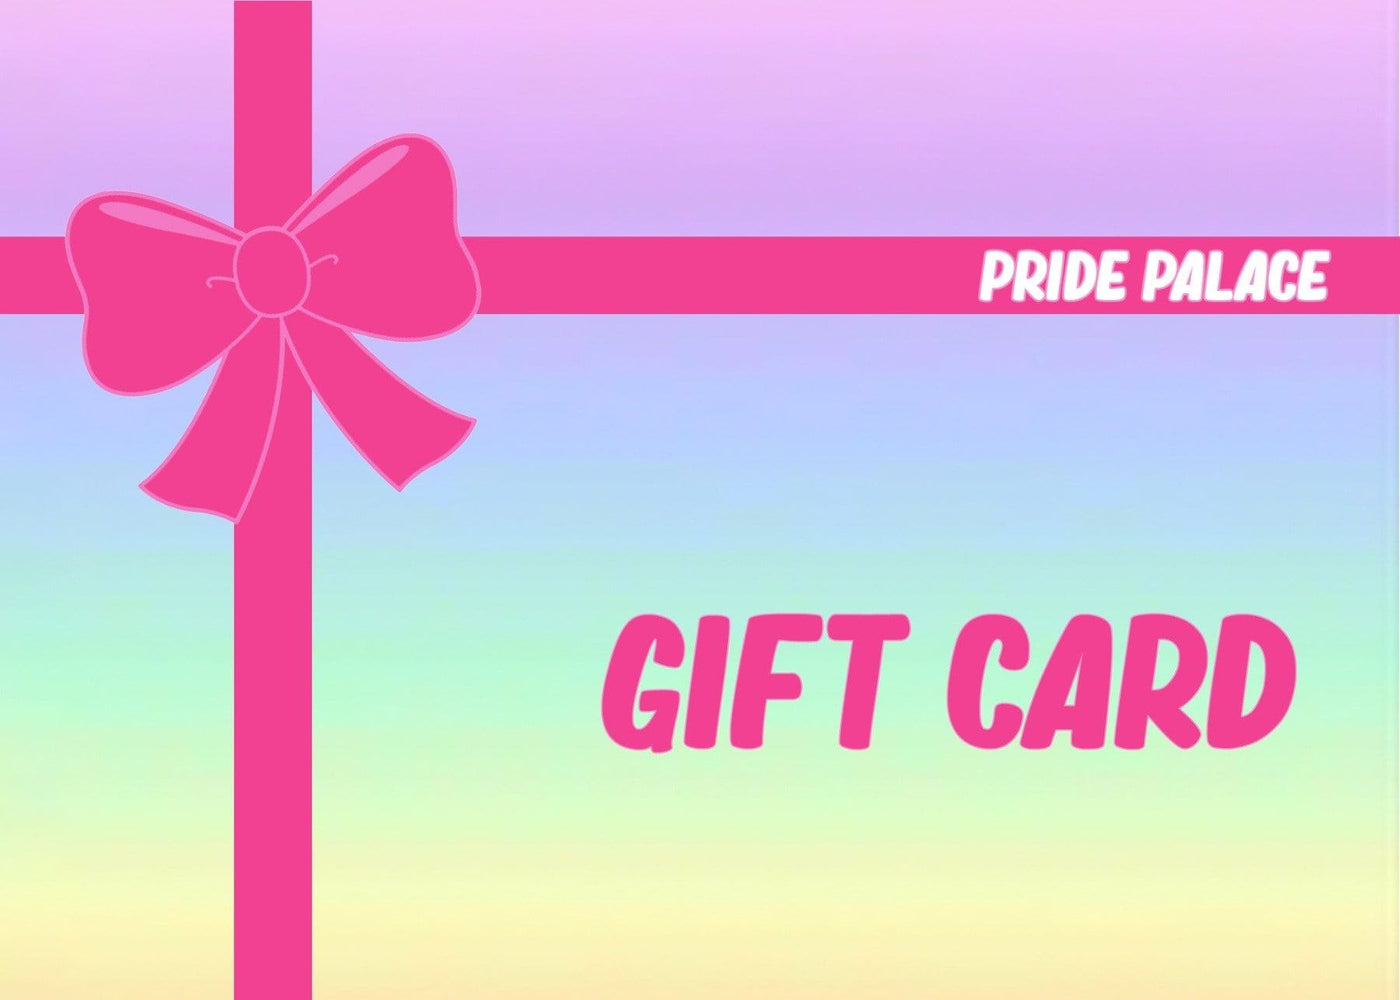 Gift Card - Pride Palace